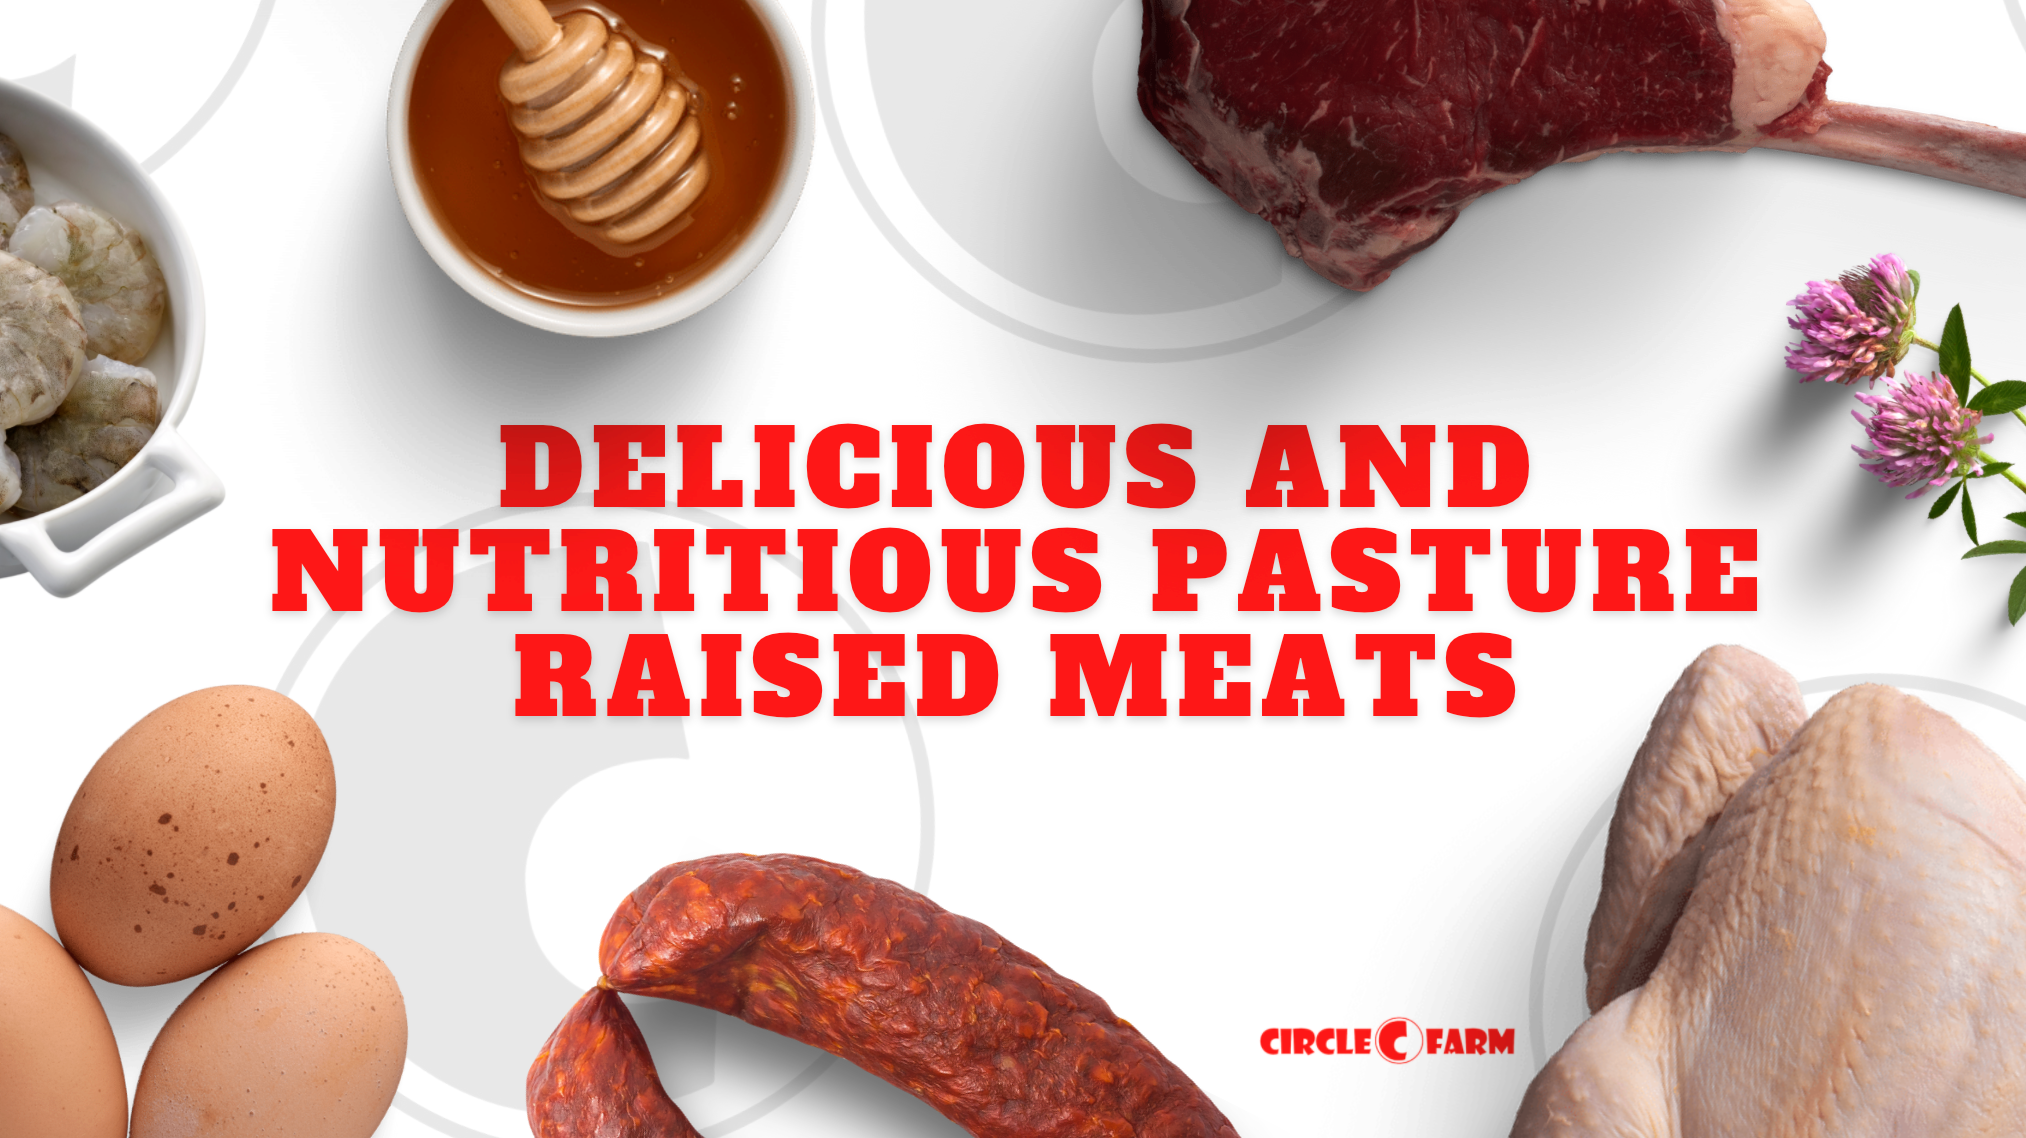 Delicious and Nutritious Pasture Raised Meats